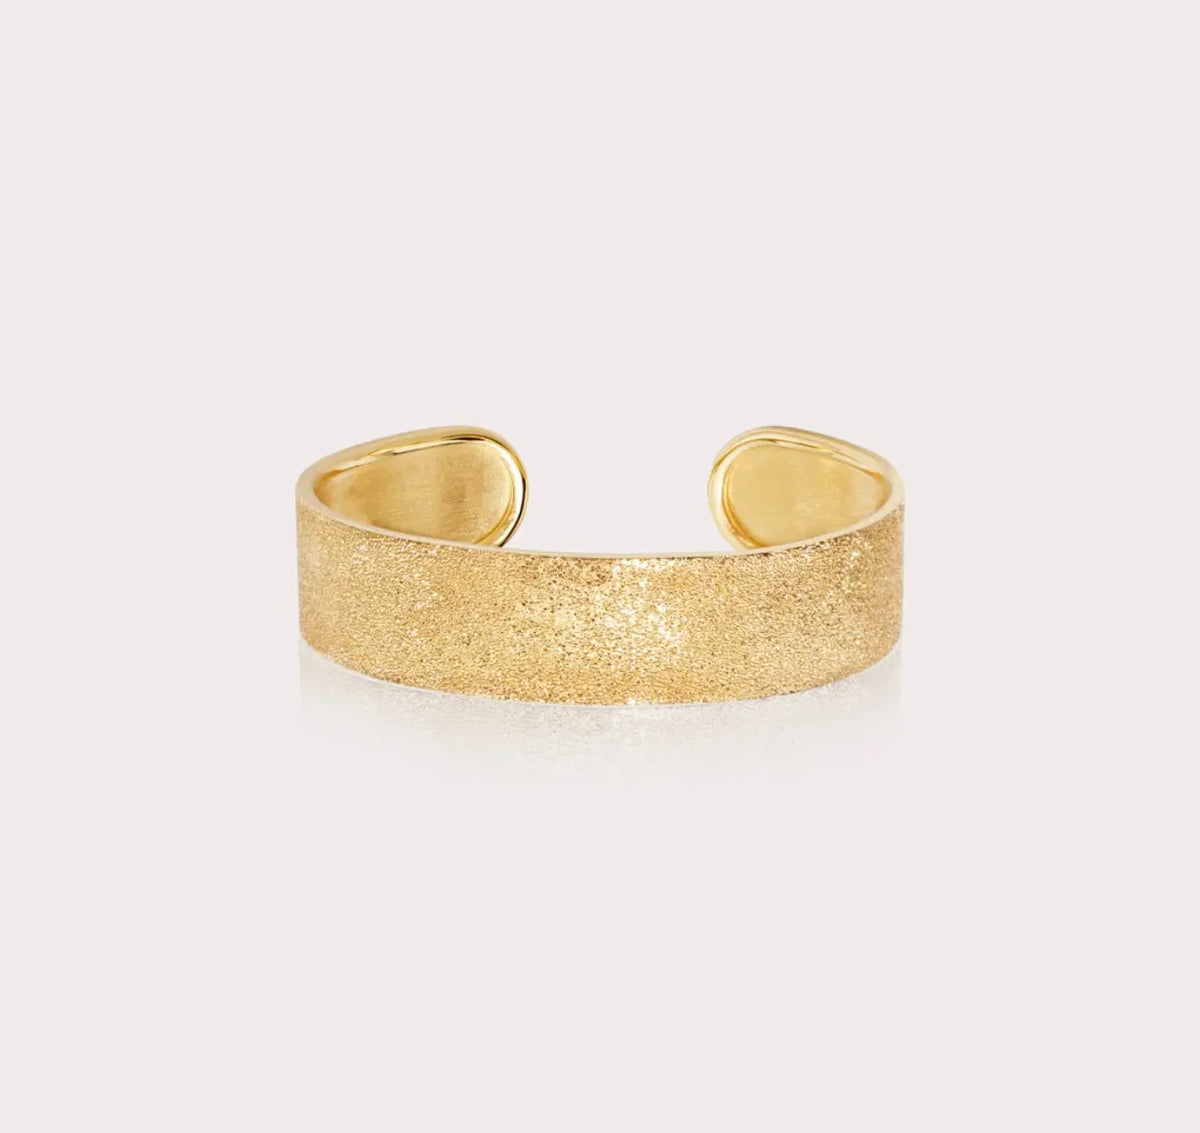 Florentine Finish is achieved by beating each piece with a diamond tipped tool, which leaves permanent faceted dents in the gold.   Made in 18k Yellow Gold, this rigid cuff measures 2 cm high.   Please note that as each product is made by hand, there may be slight natural variations in the length or tone of pieces.  Dimensions: 5 cm diameter   Designed by Carolina Bucci